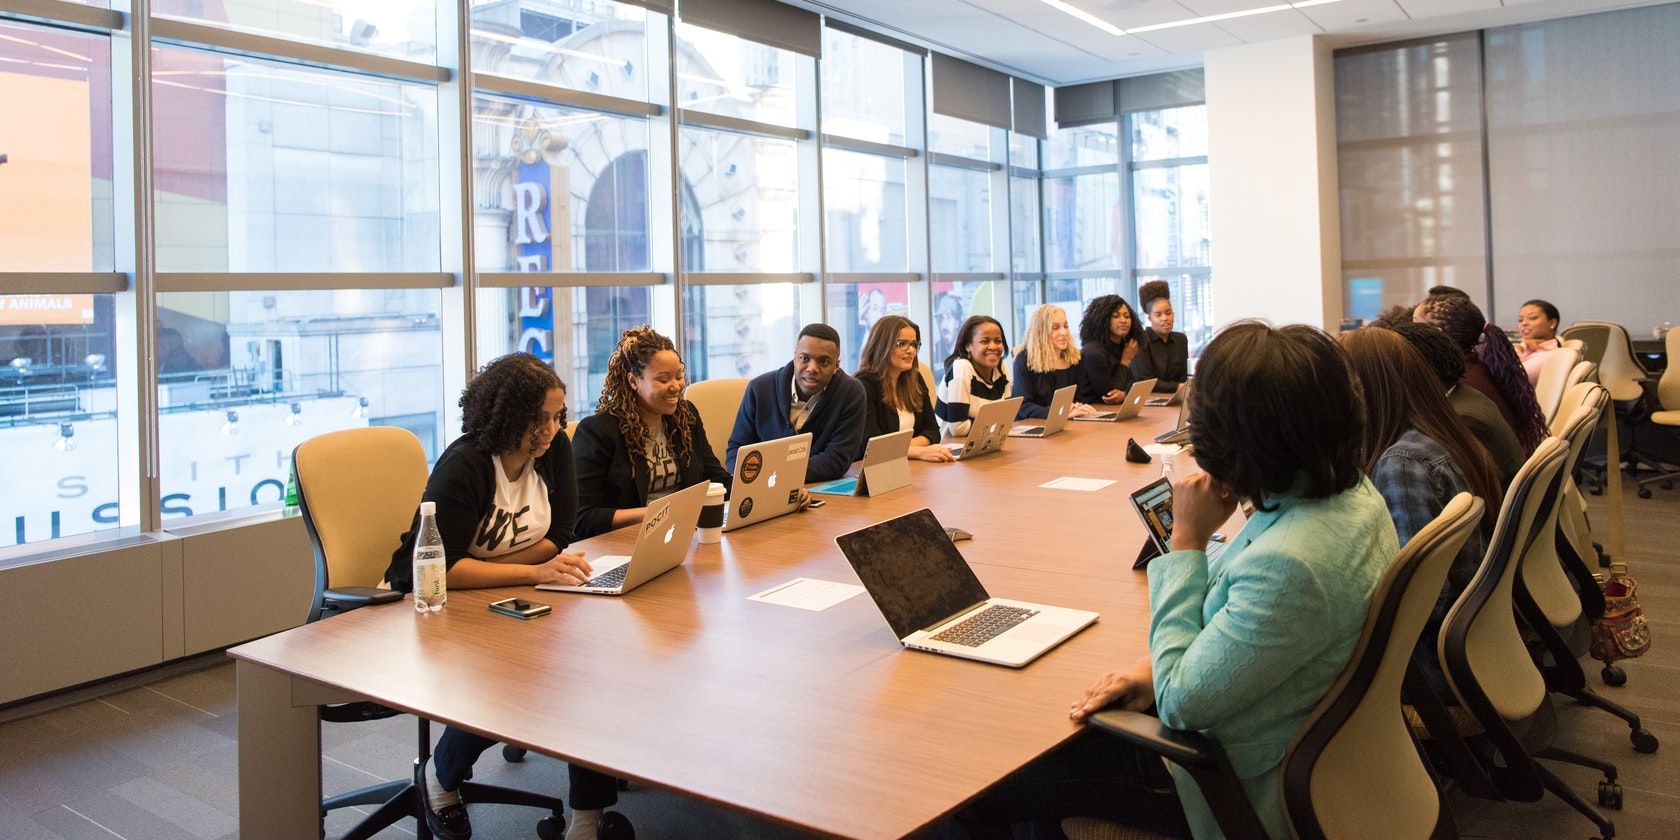 A group of people having a meeting in a conference room